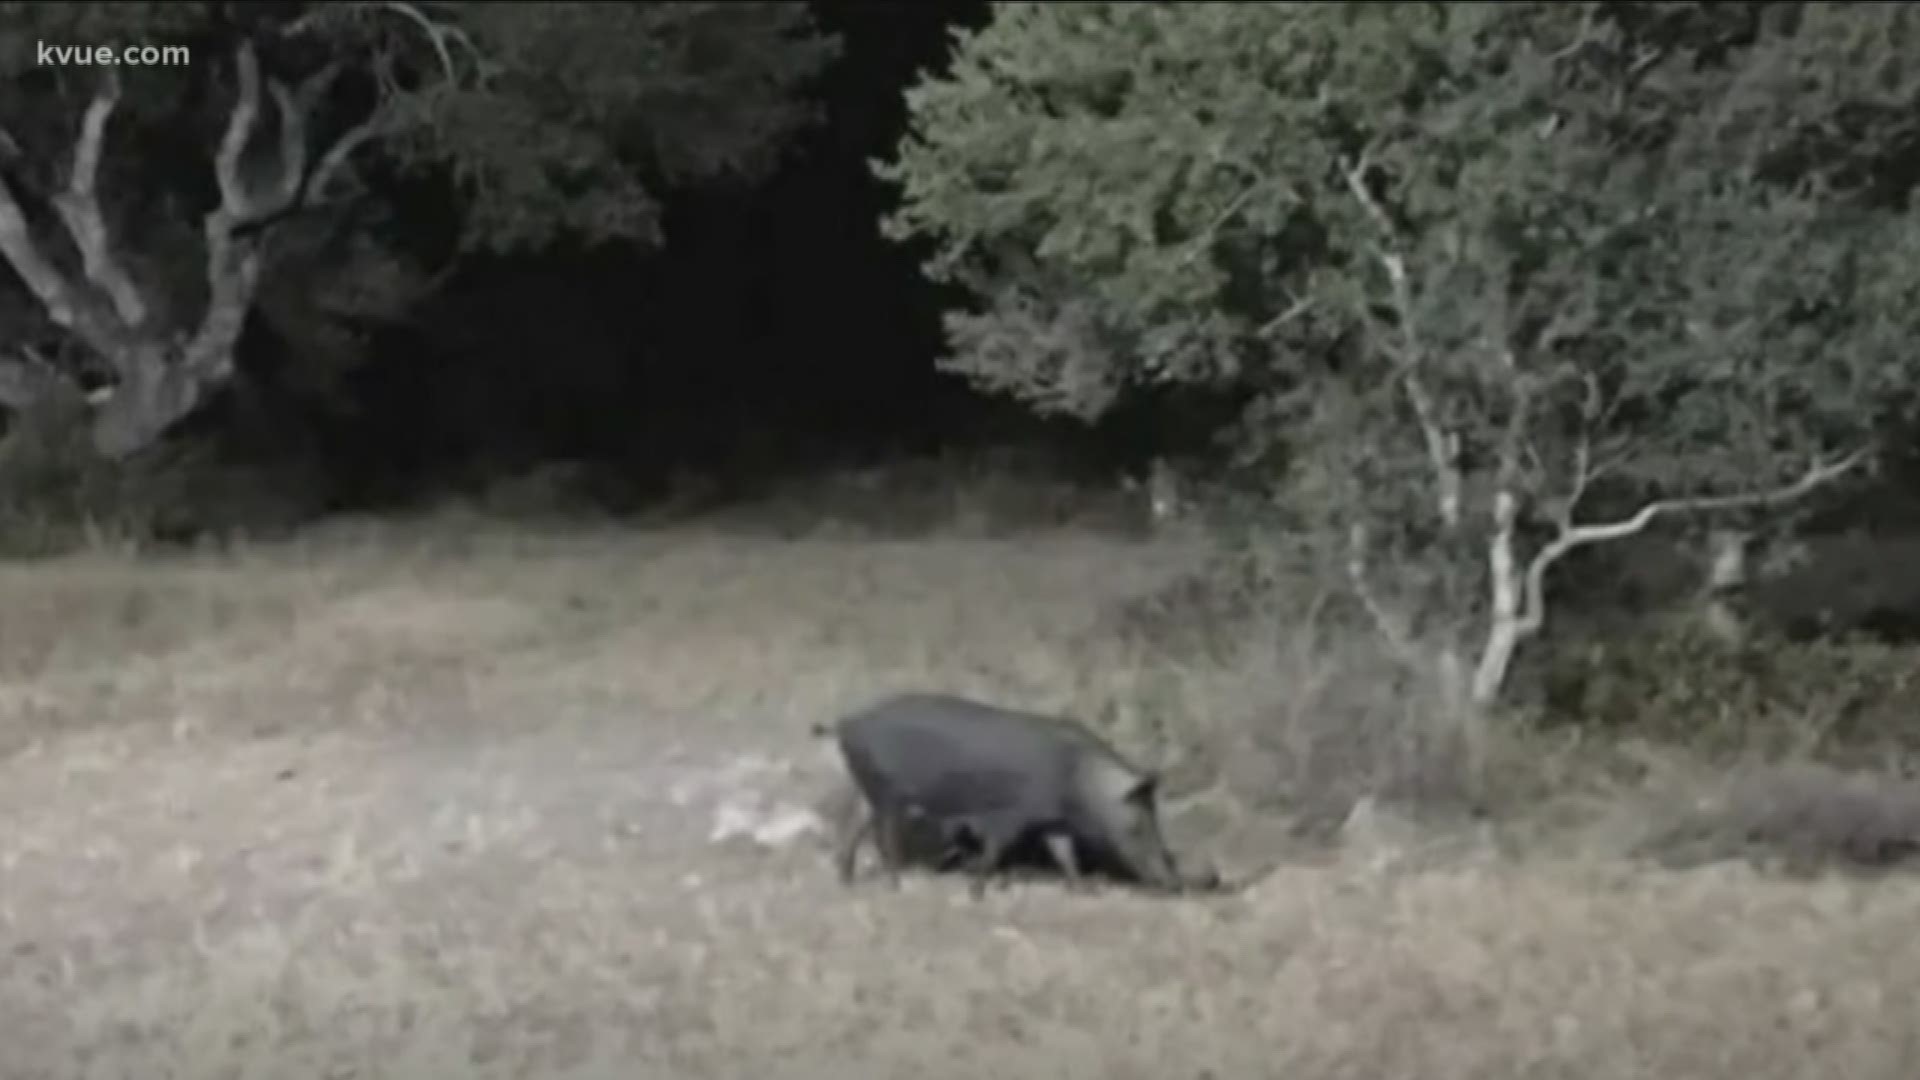 There could soon be fewer fereal hogs in Hays County thanks to a $13,000 grant form Texas A&M University.